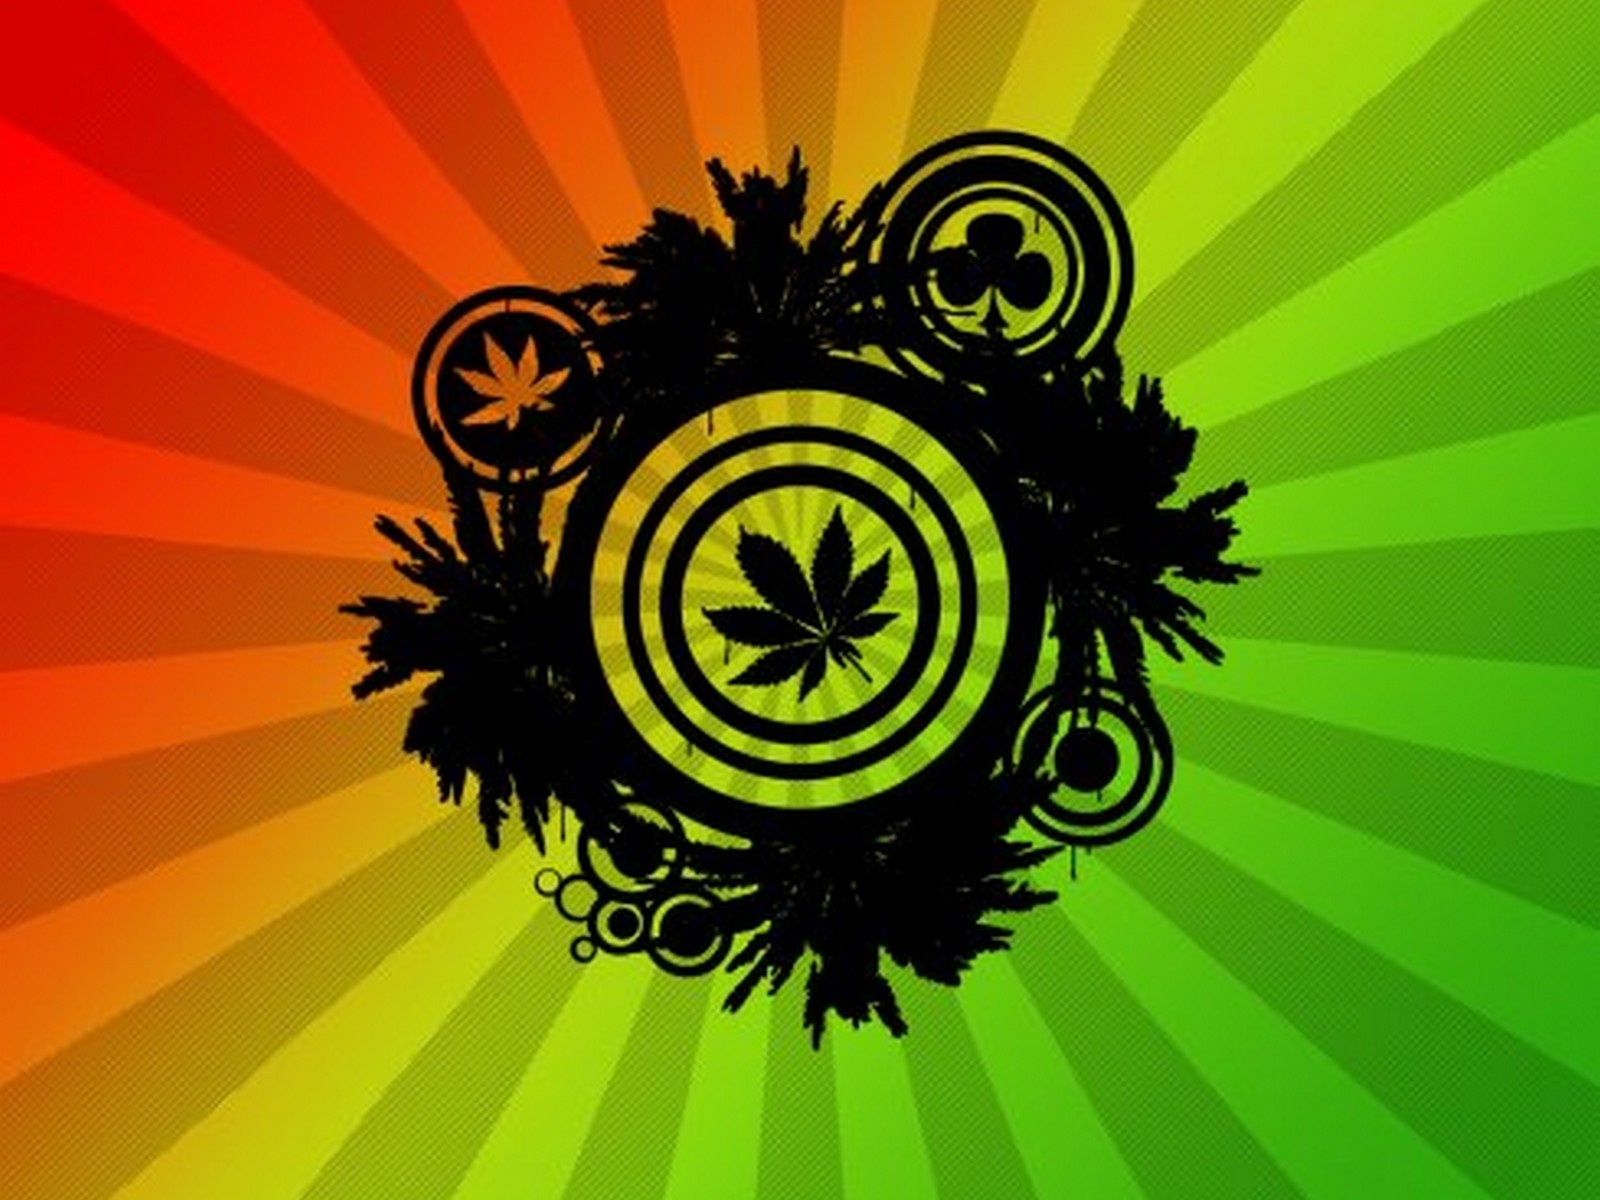 Psychedelic Weed Art Poster For Those Trippy Hippy Kinda Stoners Just